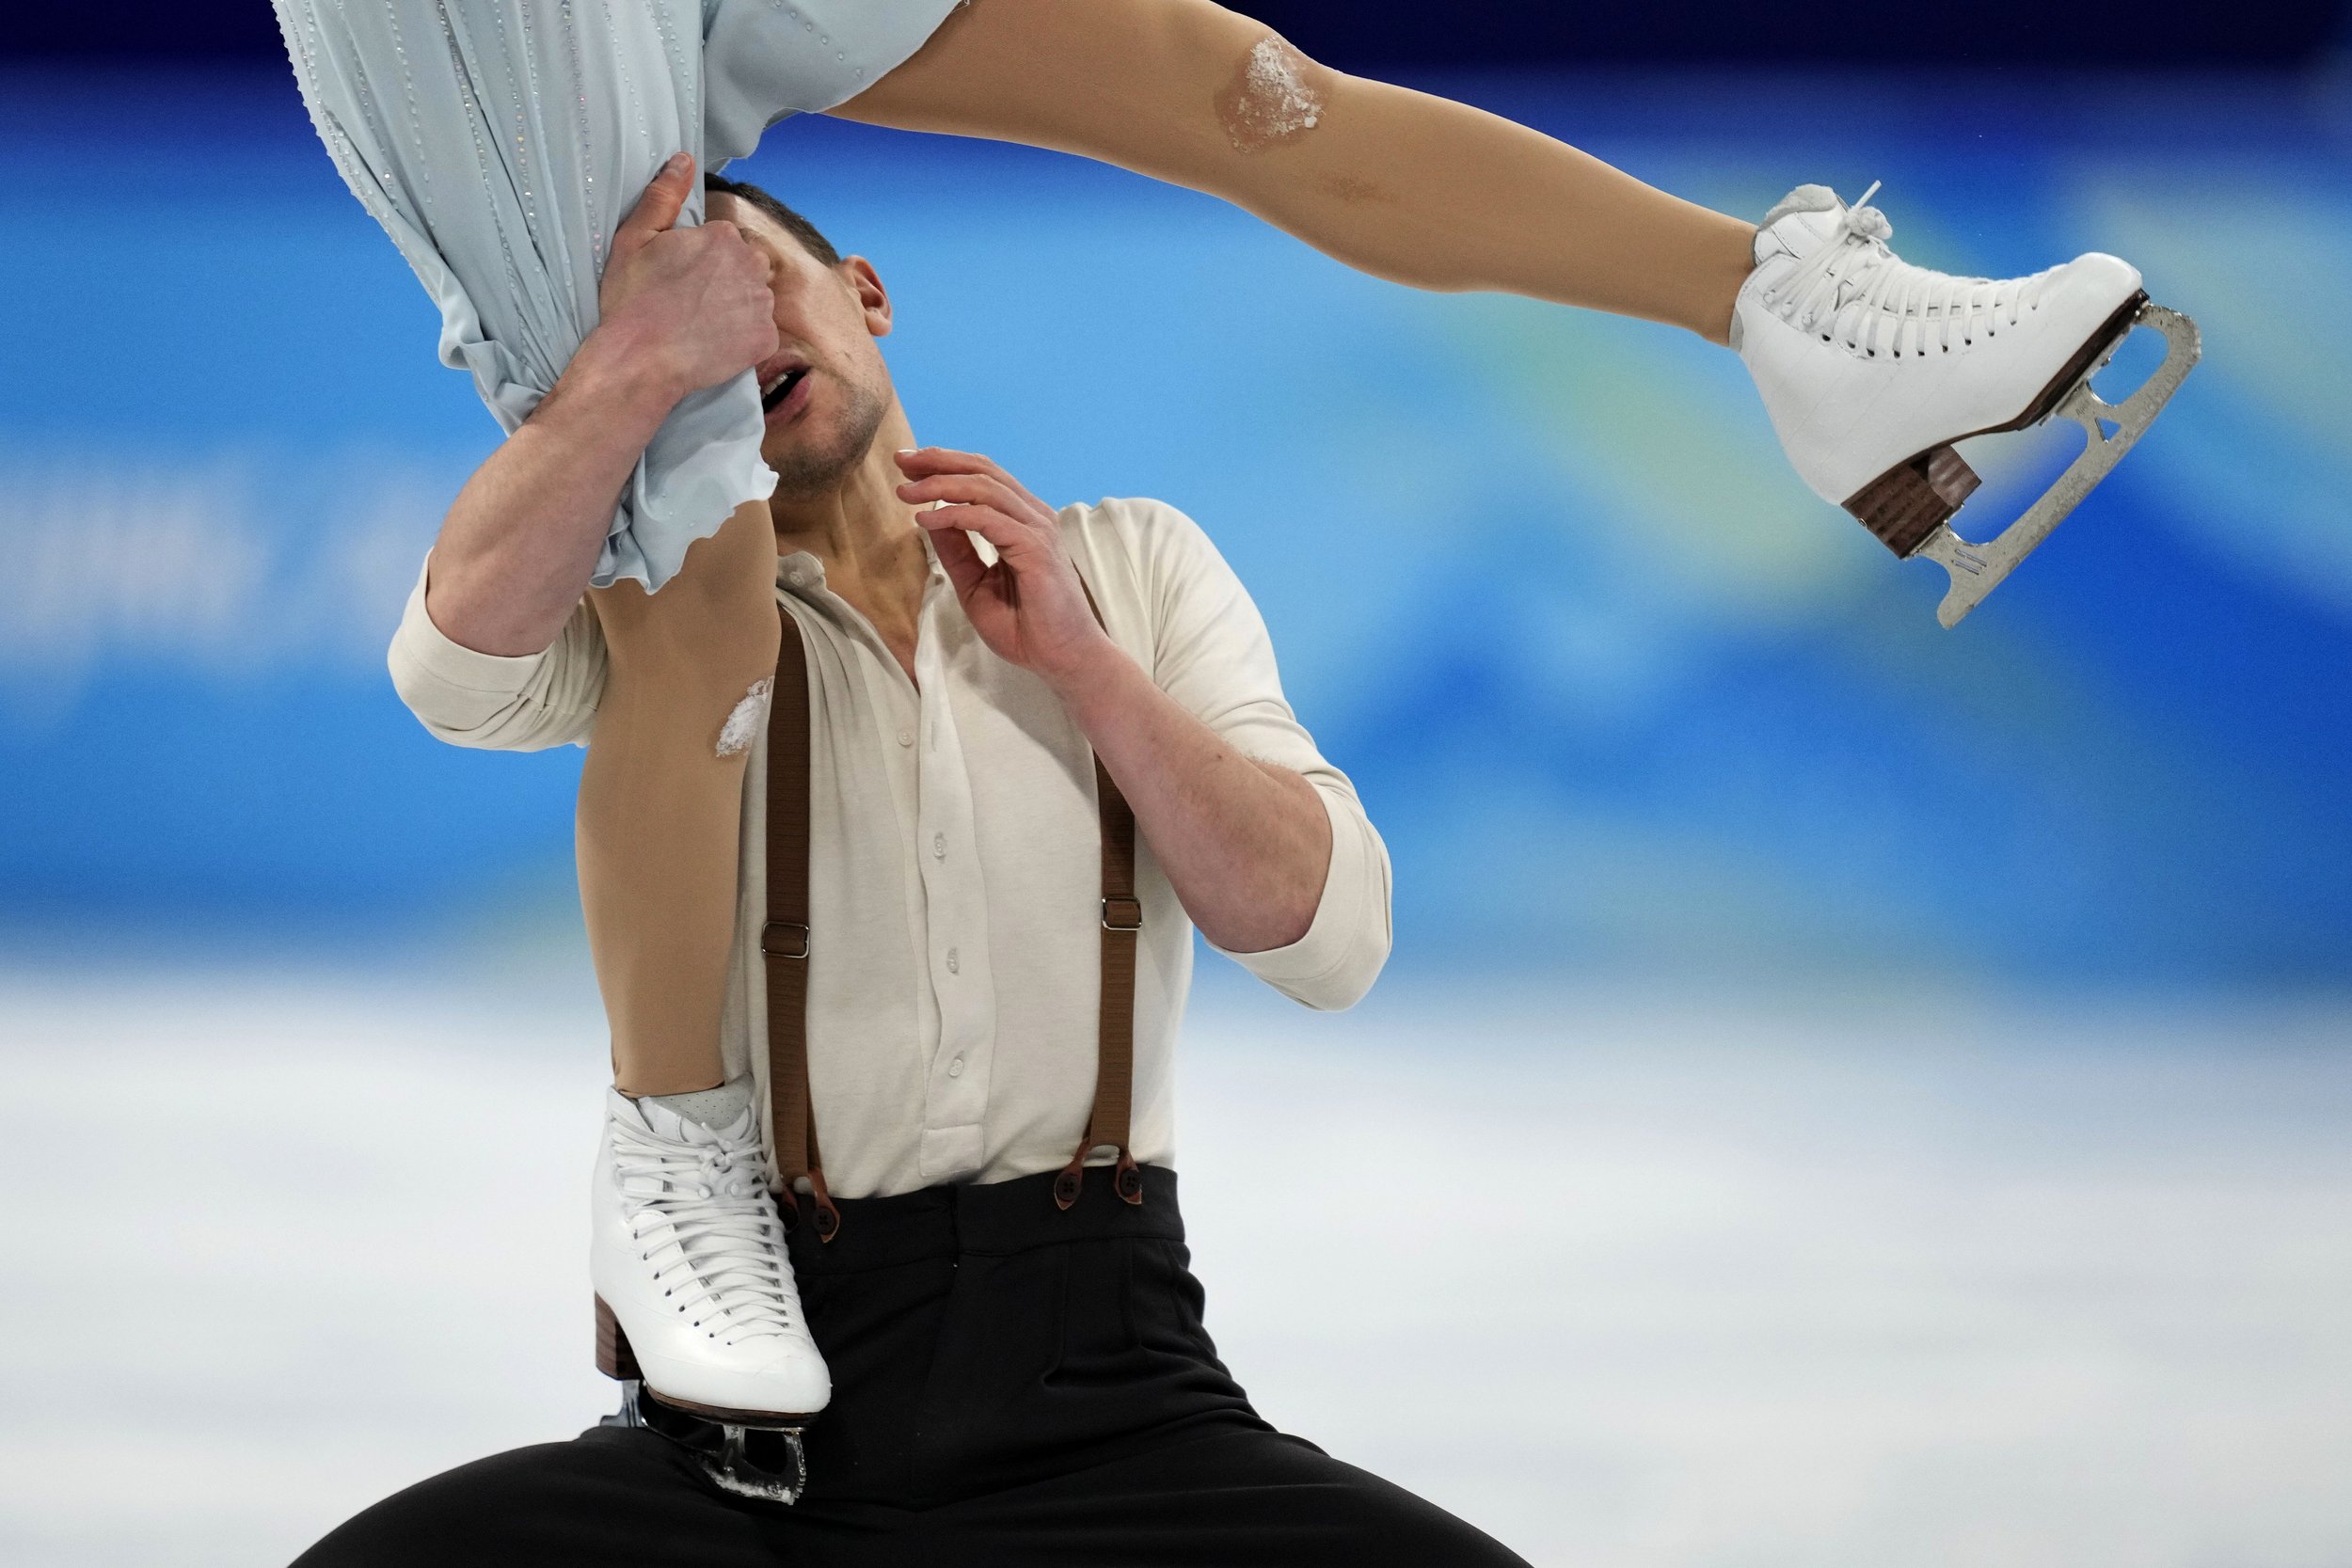  Charlene Guignard and Marco Fabbri, of Italy, perform their routine in the ice dance competition during the figure skating at the 2022 Winter Olympics, Monday, Feb. 14, 2022, in Beijing. (AP Photo/Bernat Armangue) 